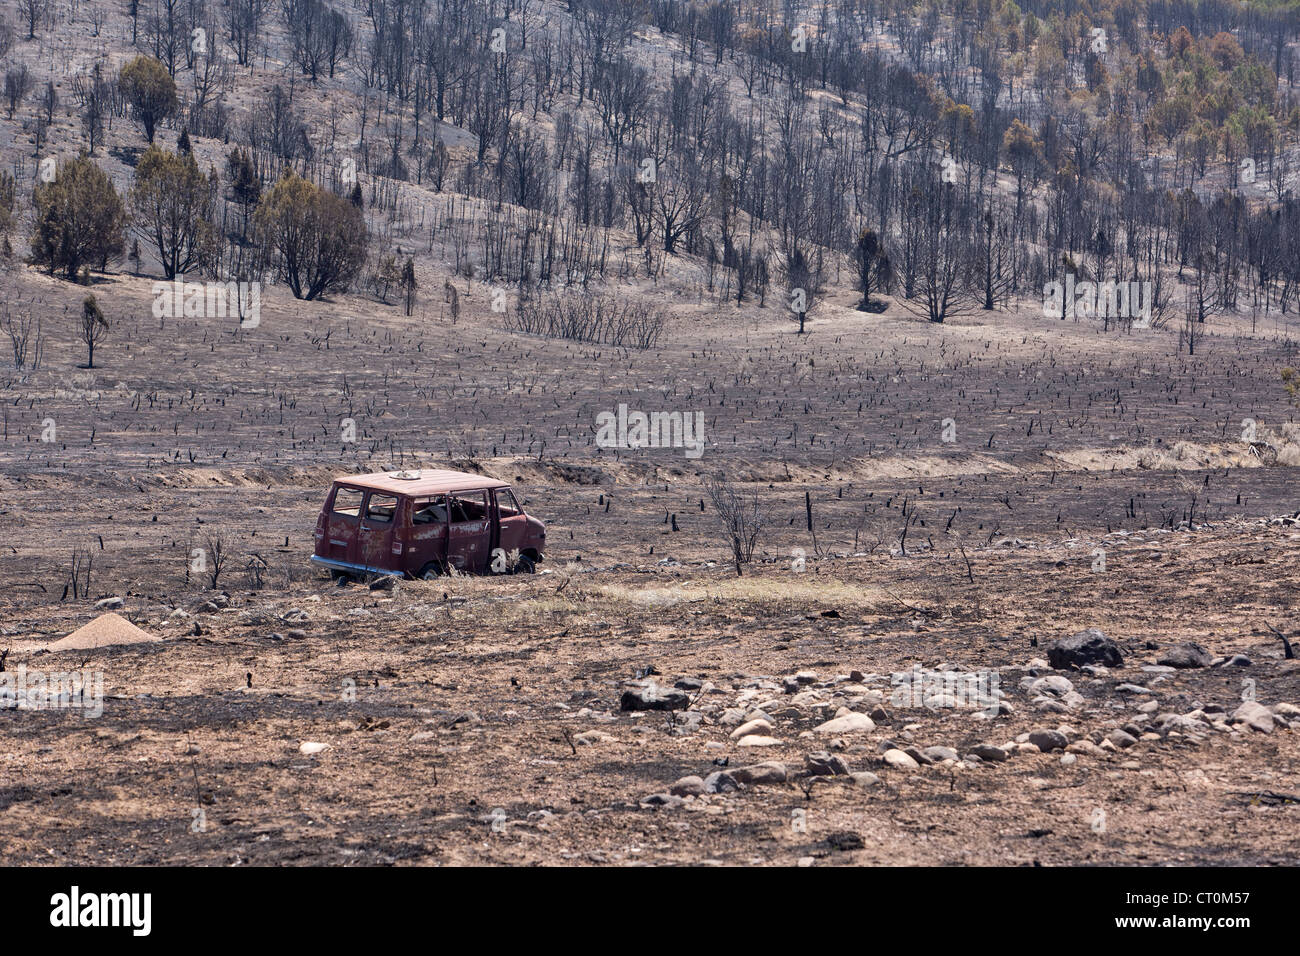 The aftermath of a wildfire which destroyed homes, cabins and buildings in a mountainous area of Utah, USA. Stock Photo